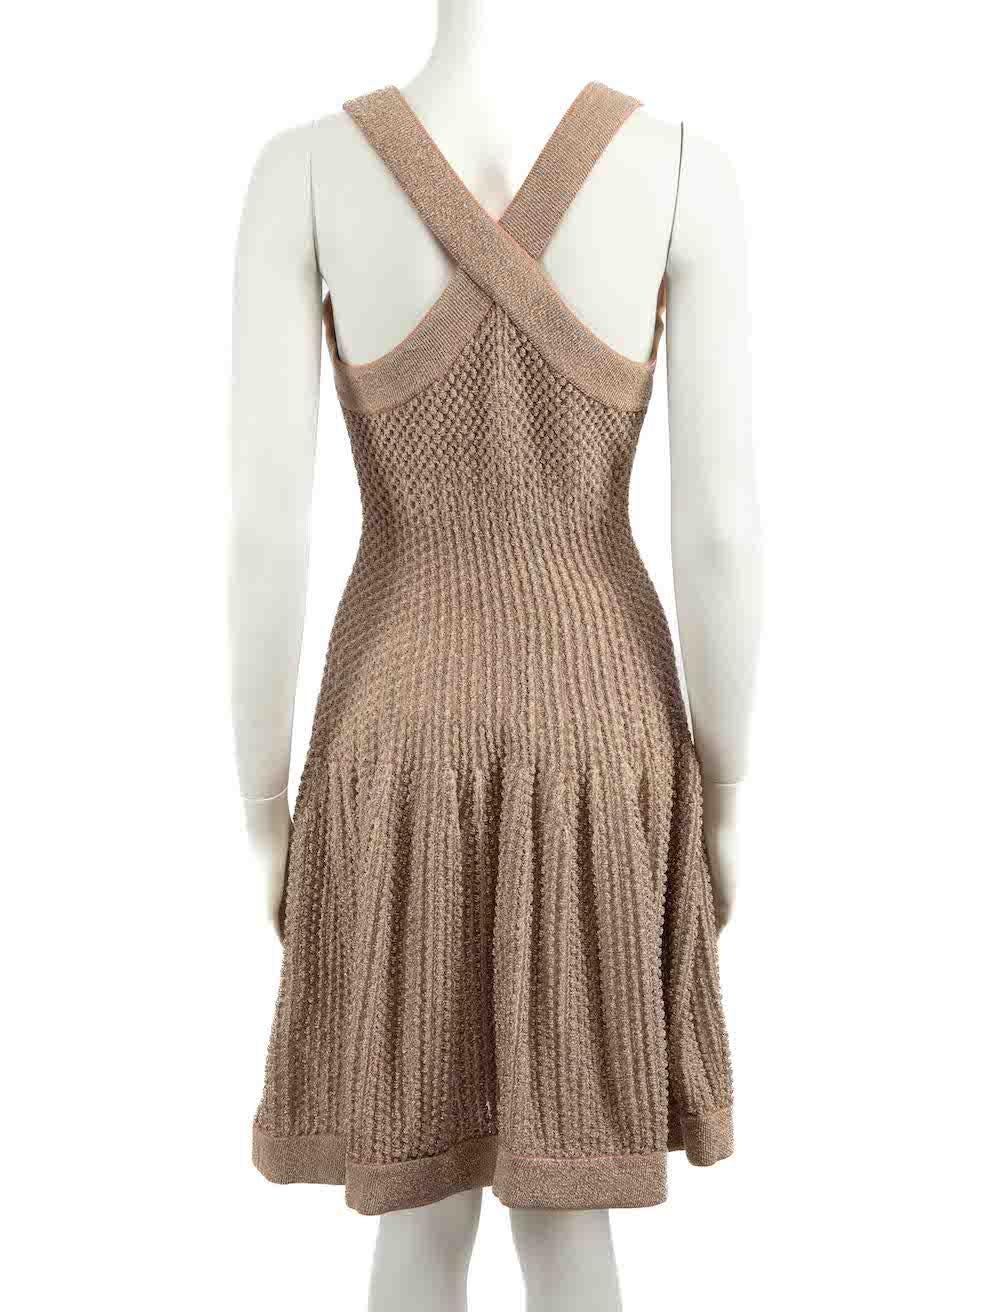 Alaïa Beige Metallic Textured Knit Mini Dress Size L In Excellent Condition For Sale In London, GB